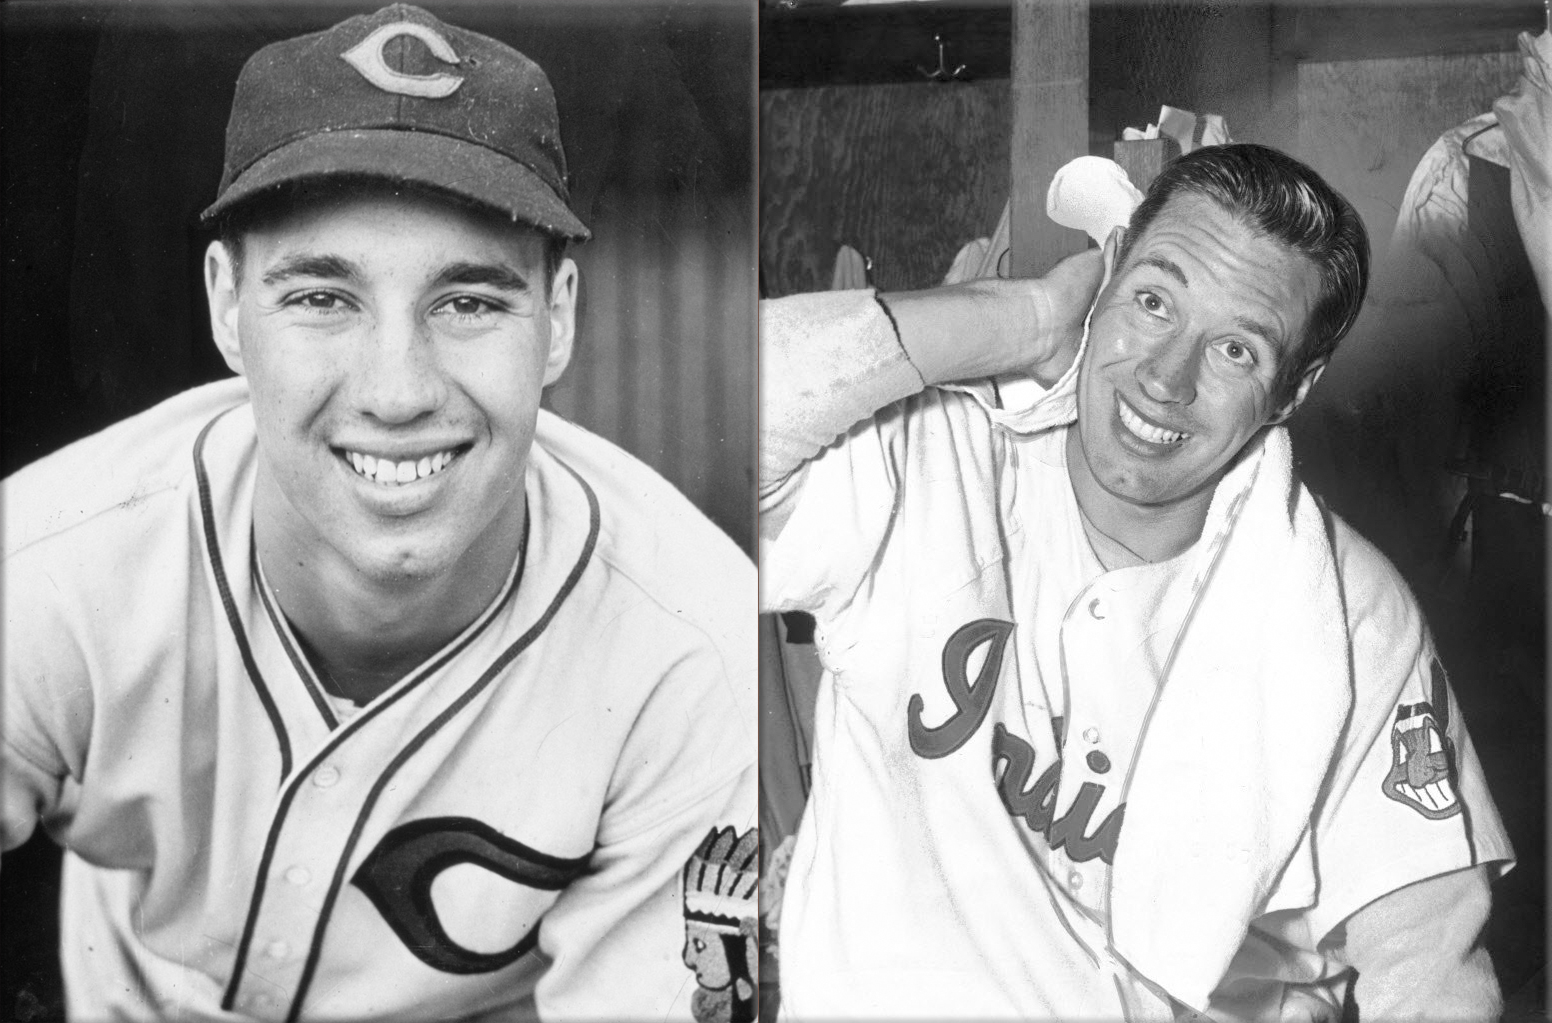 Bob Feller of the Cleveland Indians throws the only Opening Day no-hitter in the history of Major League Baseball, beating the Chicago White Sox 1-0 on April 16th, 1941.